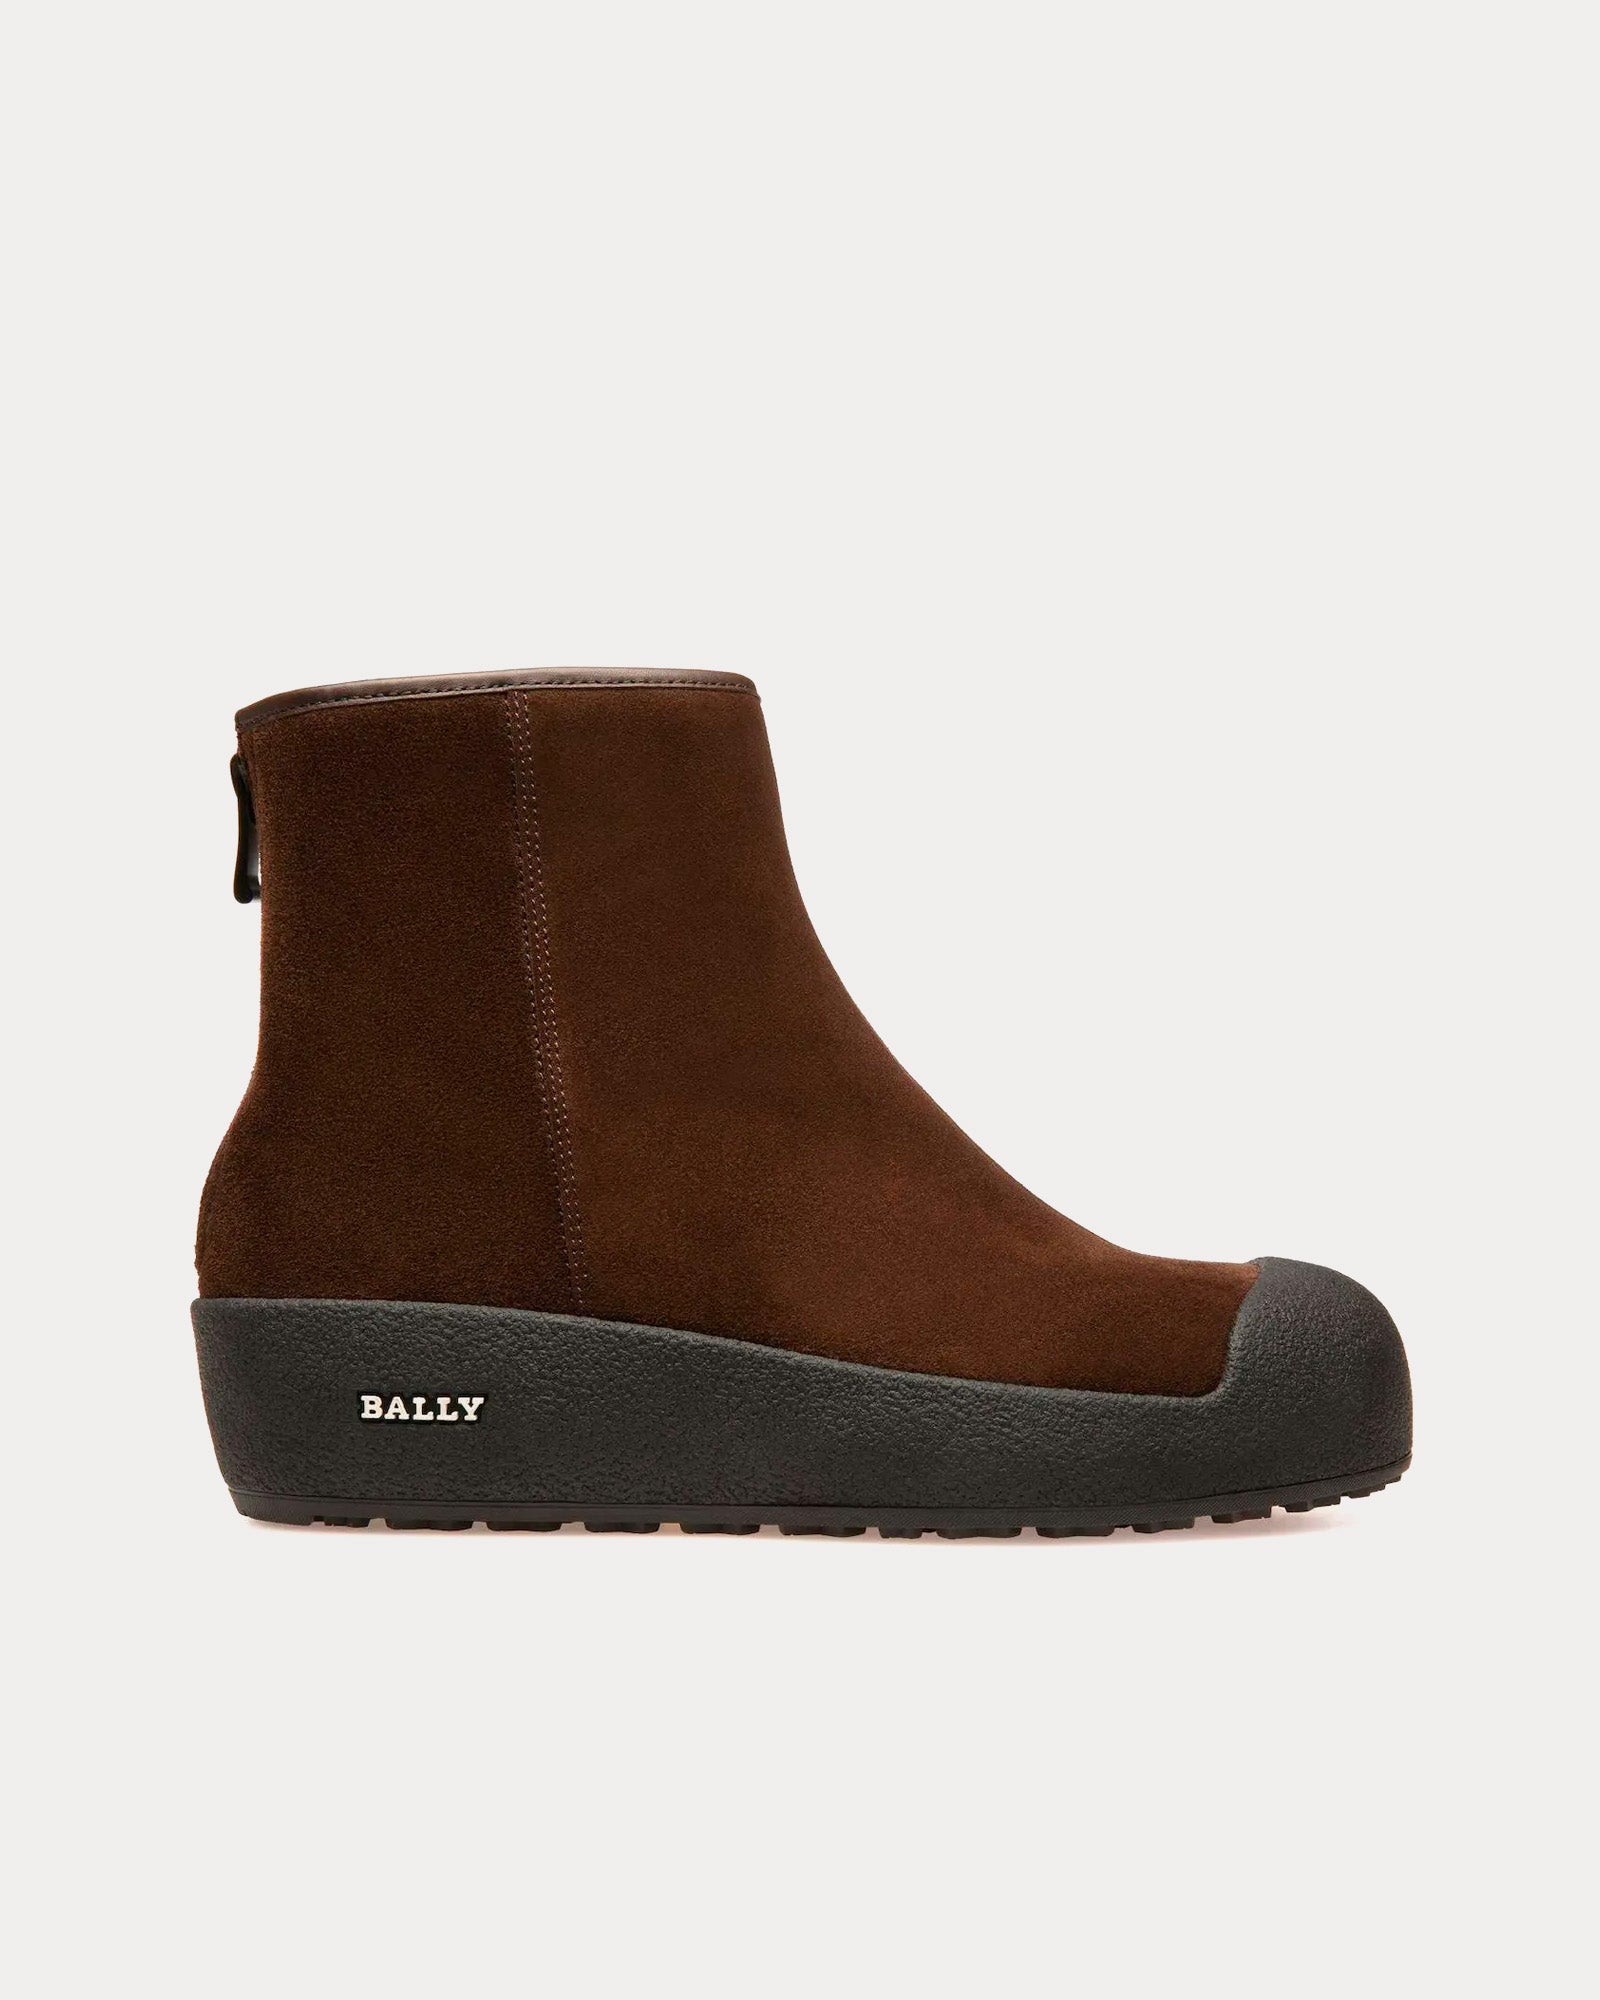 Bally - Guard Leather Brown Snow Boots